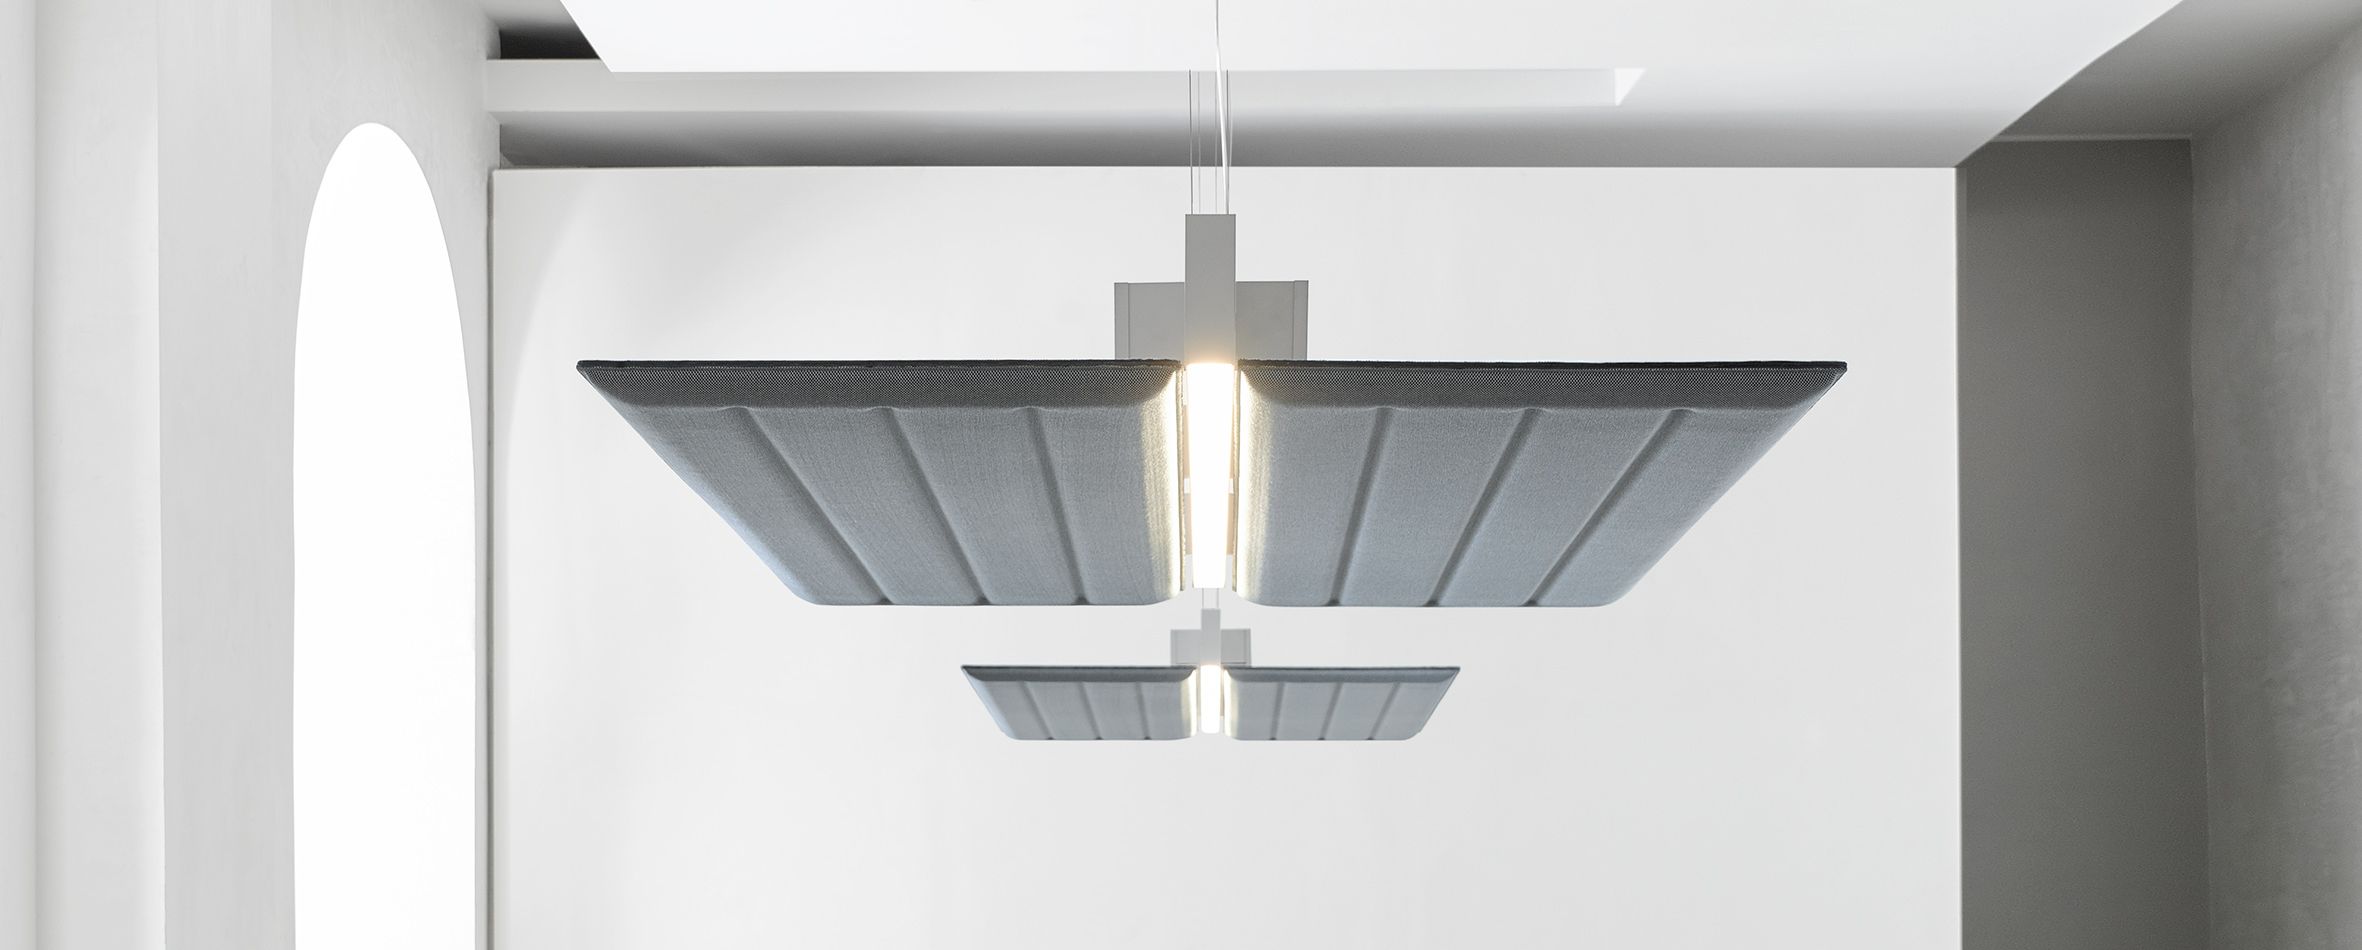 Diade lighting and sound absorption system by Monica Armani for Luceplan